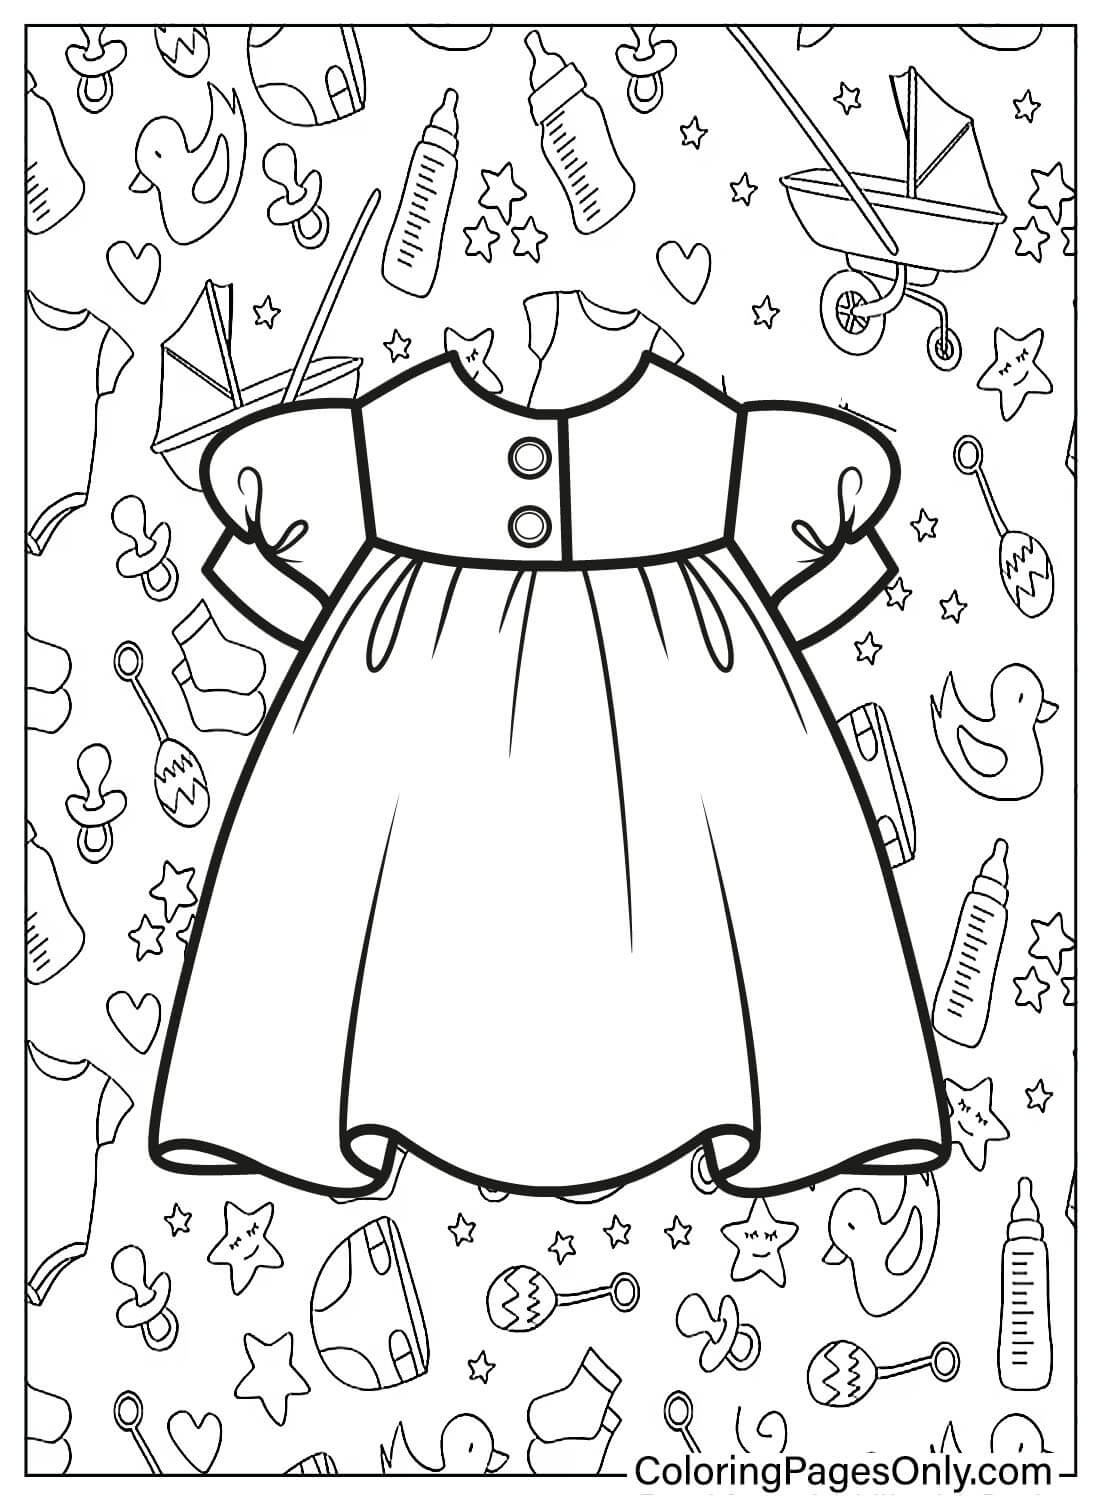 Baby Dress Coloring Page - Free Printable Coloring Pages